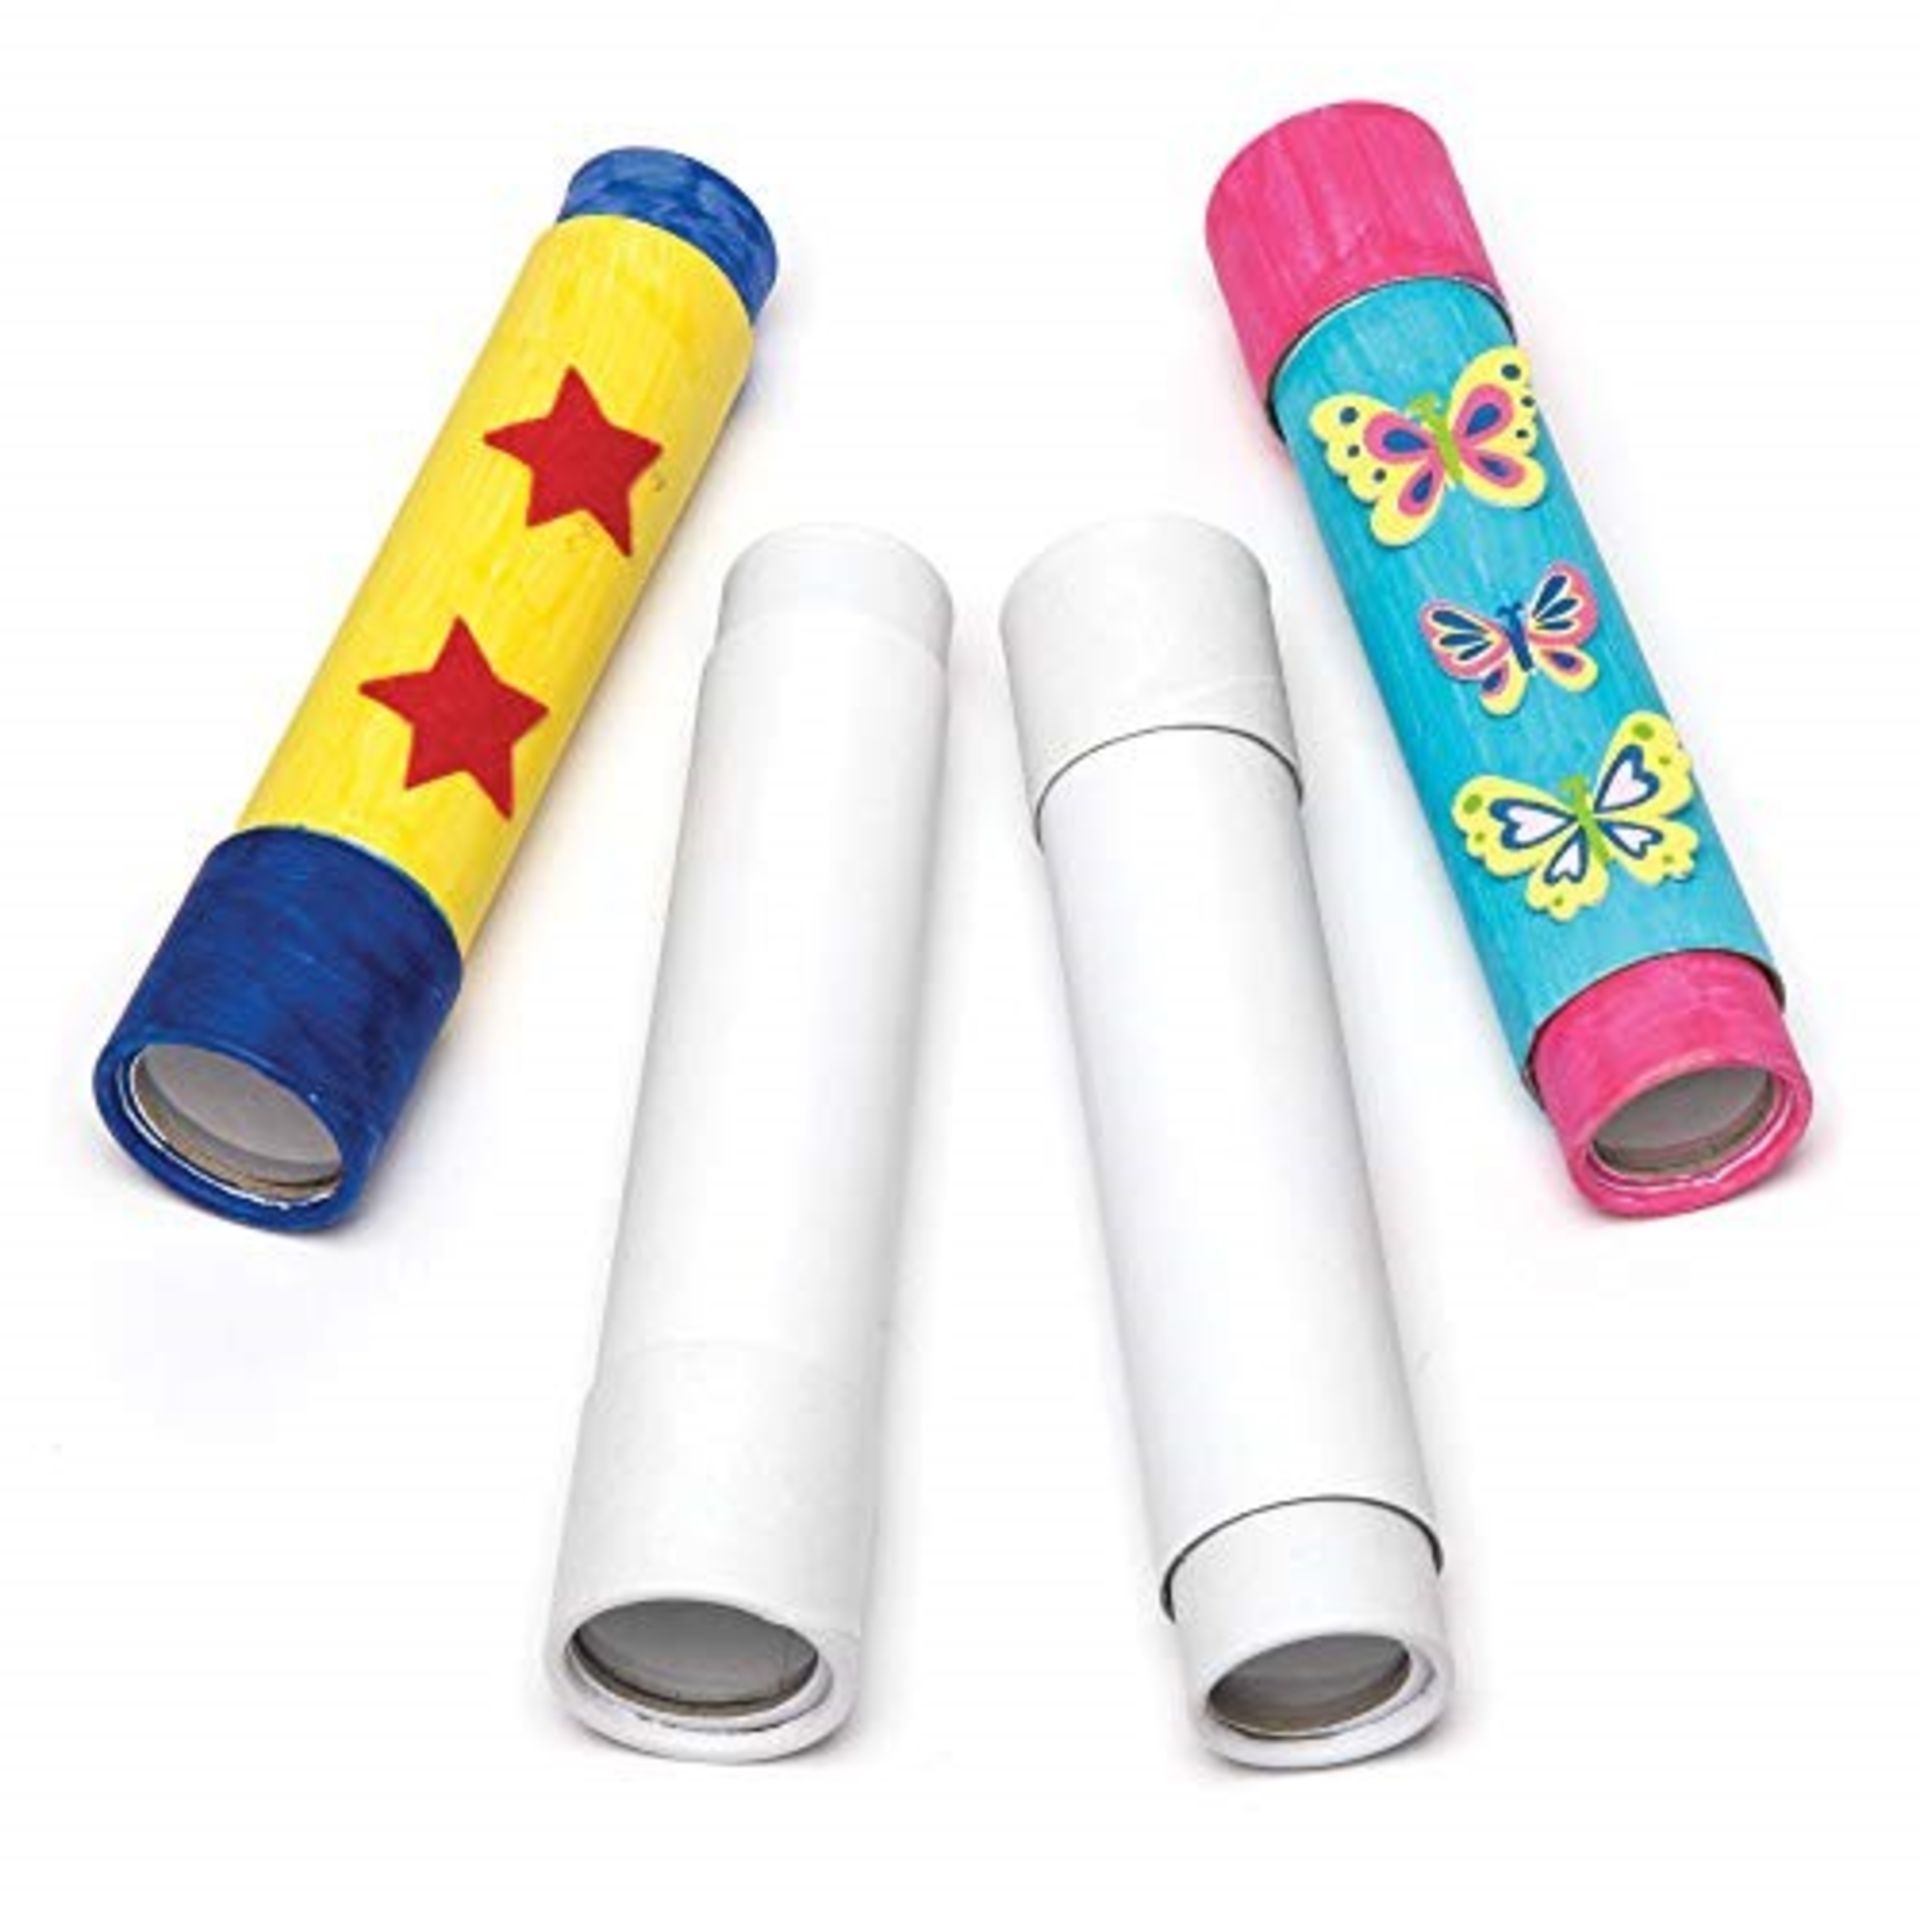 Baker Ross AR403 Design Your Own Telescopes, Blanks for Kids to Paint, Decorate and Pe - Image 3 of 4